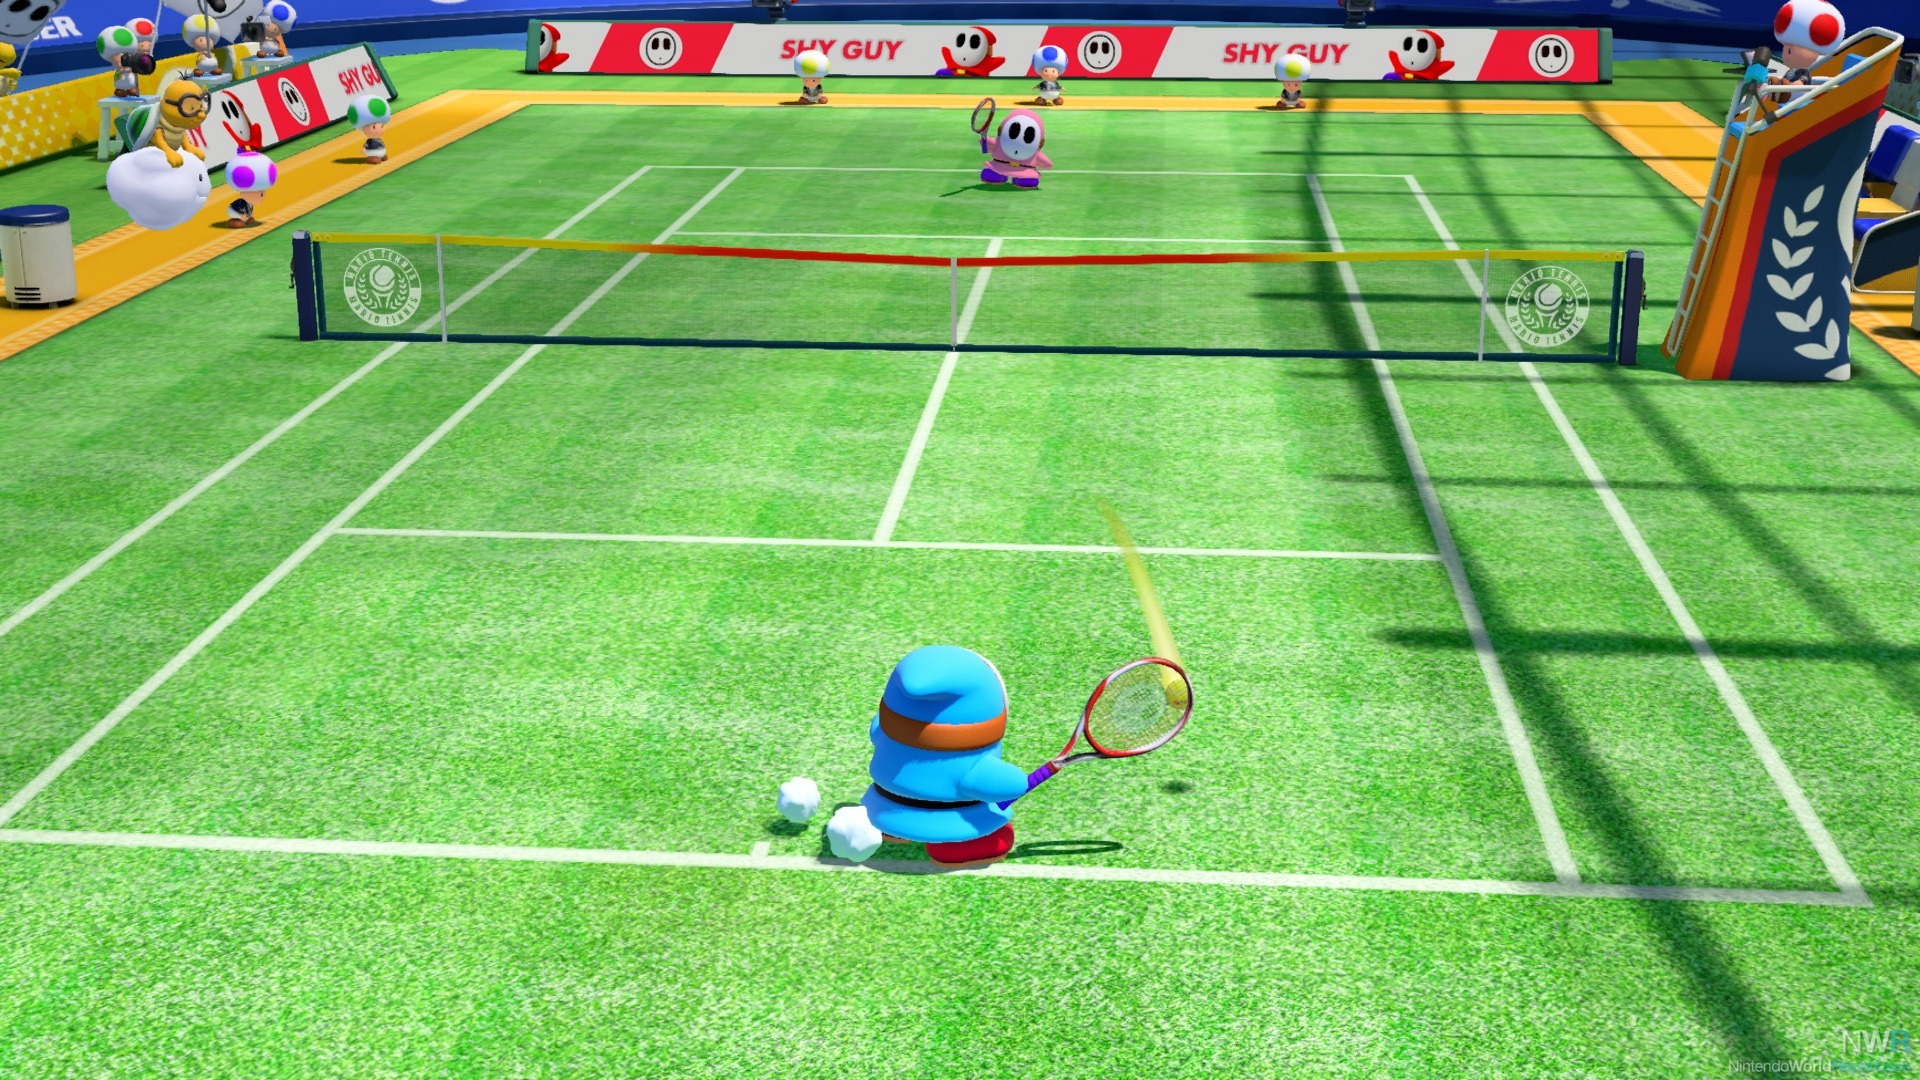 Nintendo Serving Up Free Switch Online Trial For Mario Tennis Aces - News -  Nintendo World Report